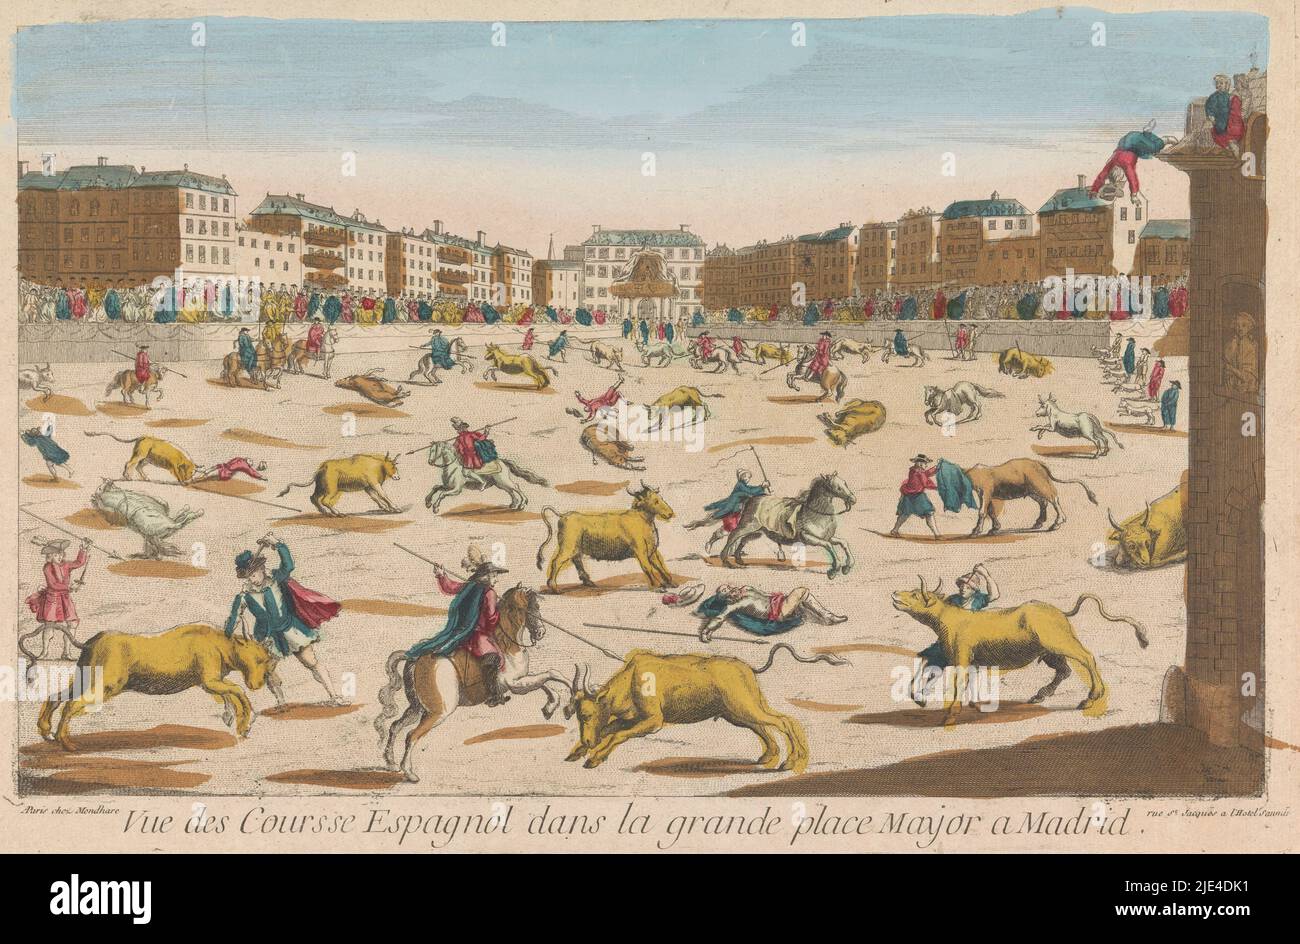 View of a bullfight on the Plaza Mayor in Madrid, Louis-Joseph Mondhare, 1759 - c. 1796, publisher: Louis-Joseph Mondhare, (mentioned on object), print maker: anonymous, publisher: Paris, print maker: France, 1759 - c. 1796, paper, etching, brush, h 284 mm × w 438 mm Stock Photo